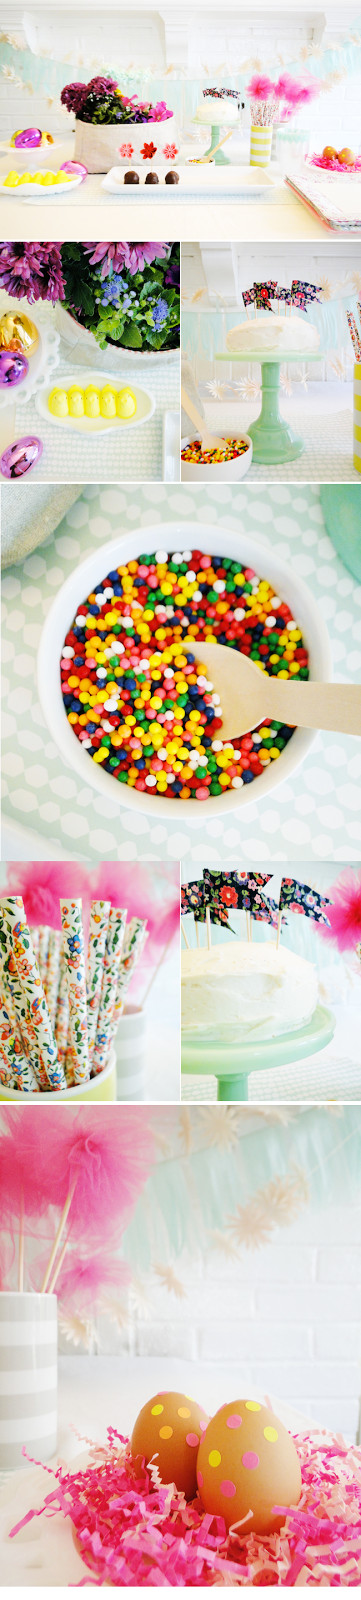 Easter Party Food Ideas Pinterest
 The Pink Doormat Easter Party Ideas on Pinterest